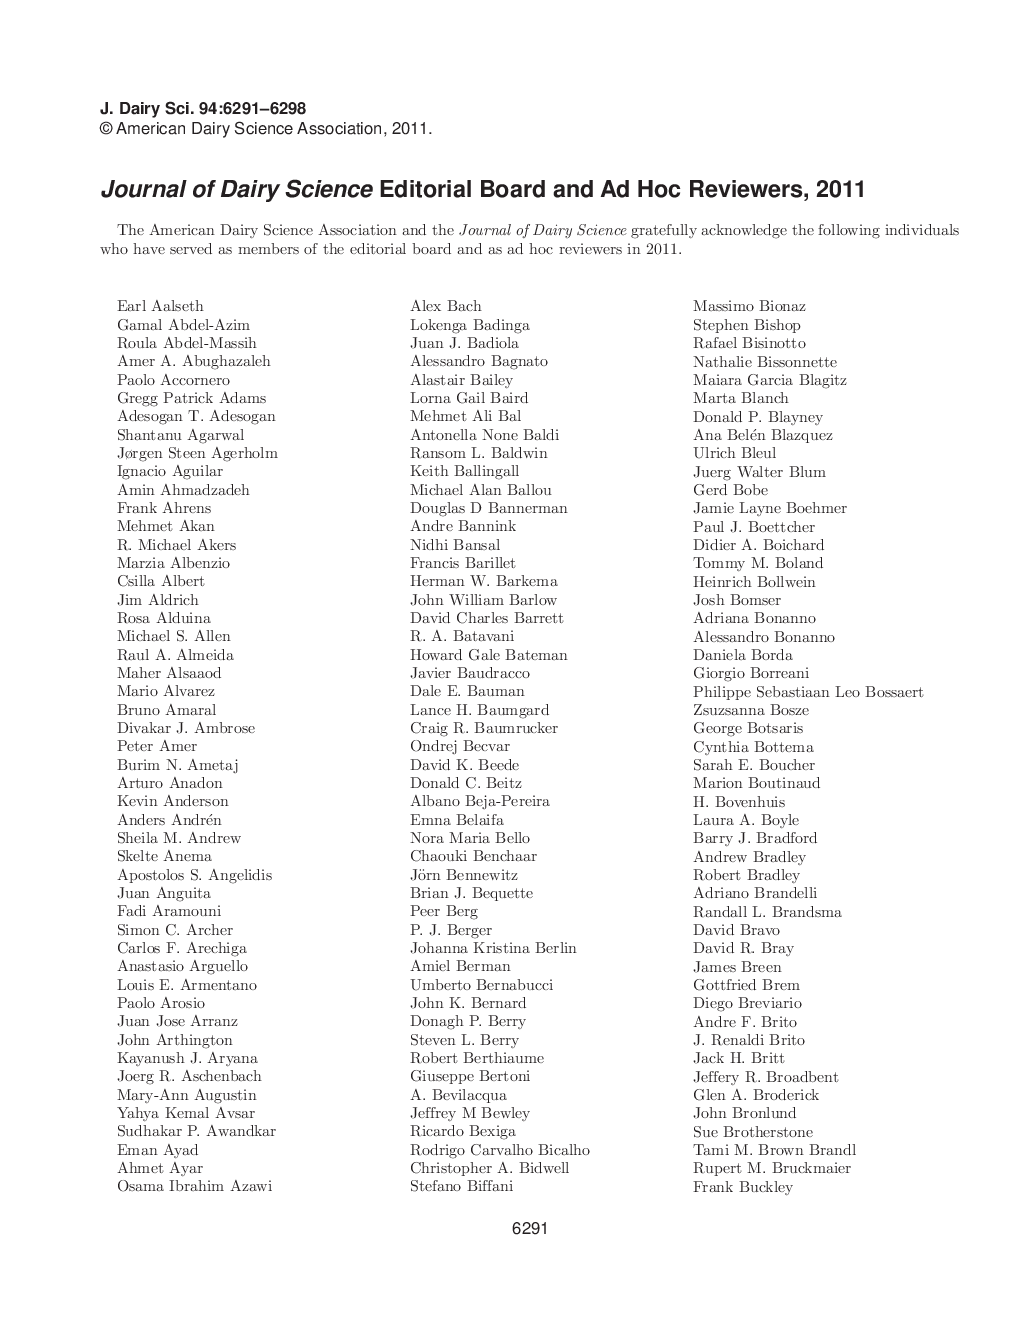 Journal of Dairy Science Editorial Board and Ad Hoc Reviewers, 2011